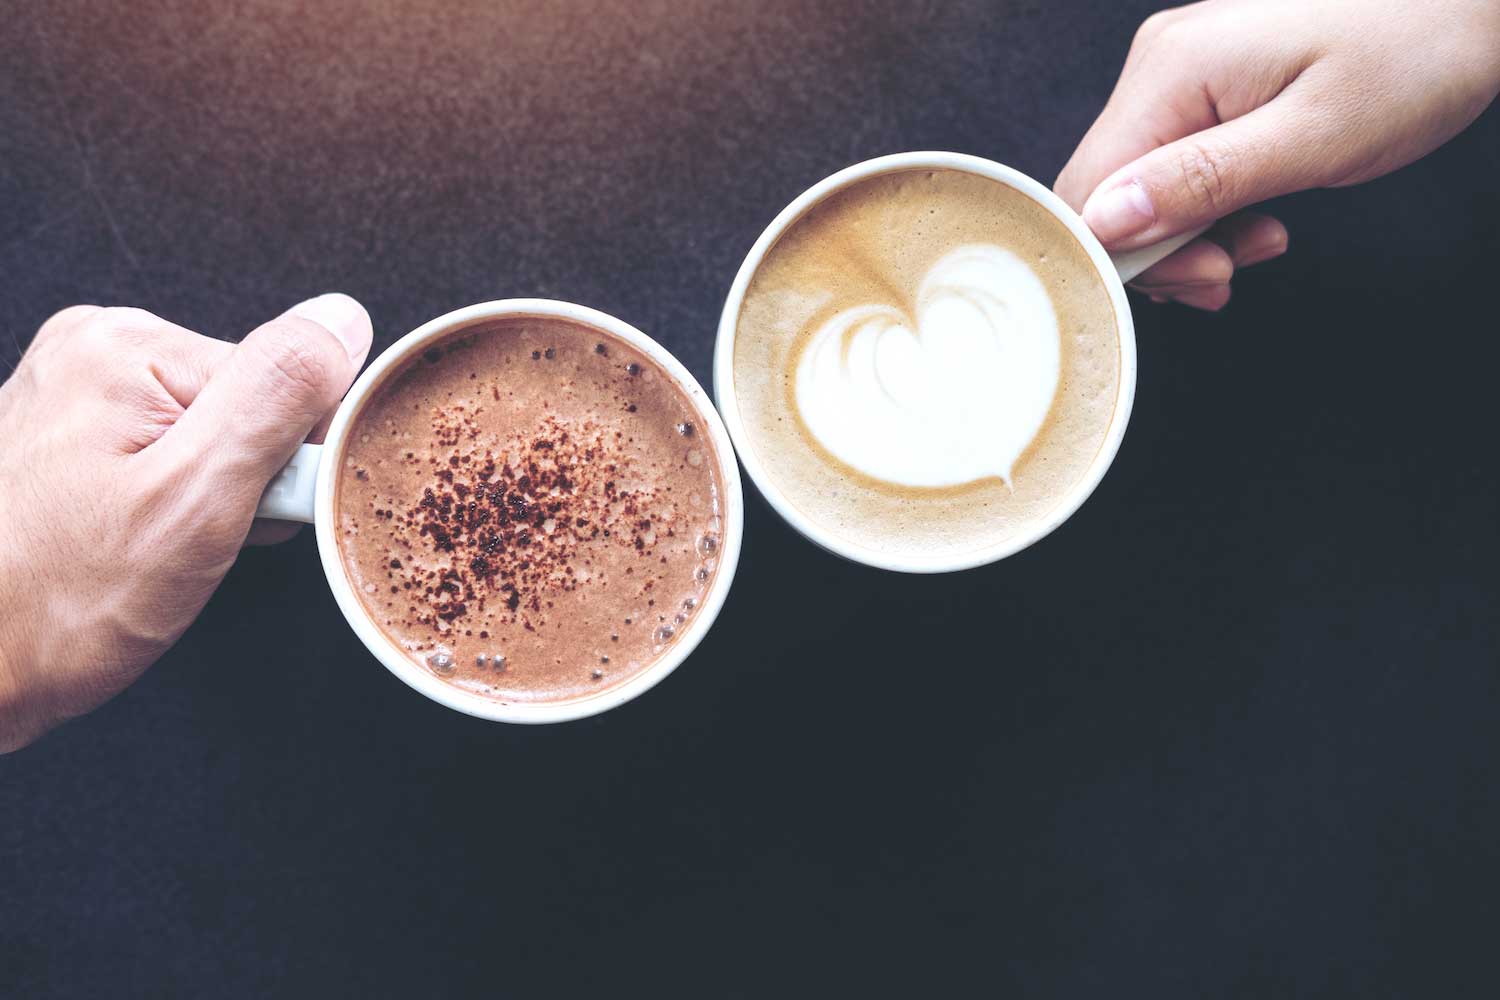 Hands holding cups of coffee and hot cocoa.